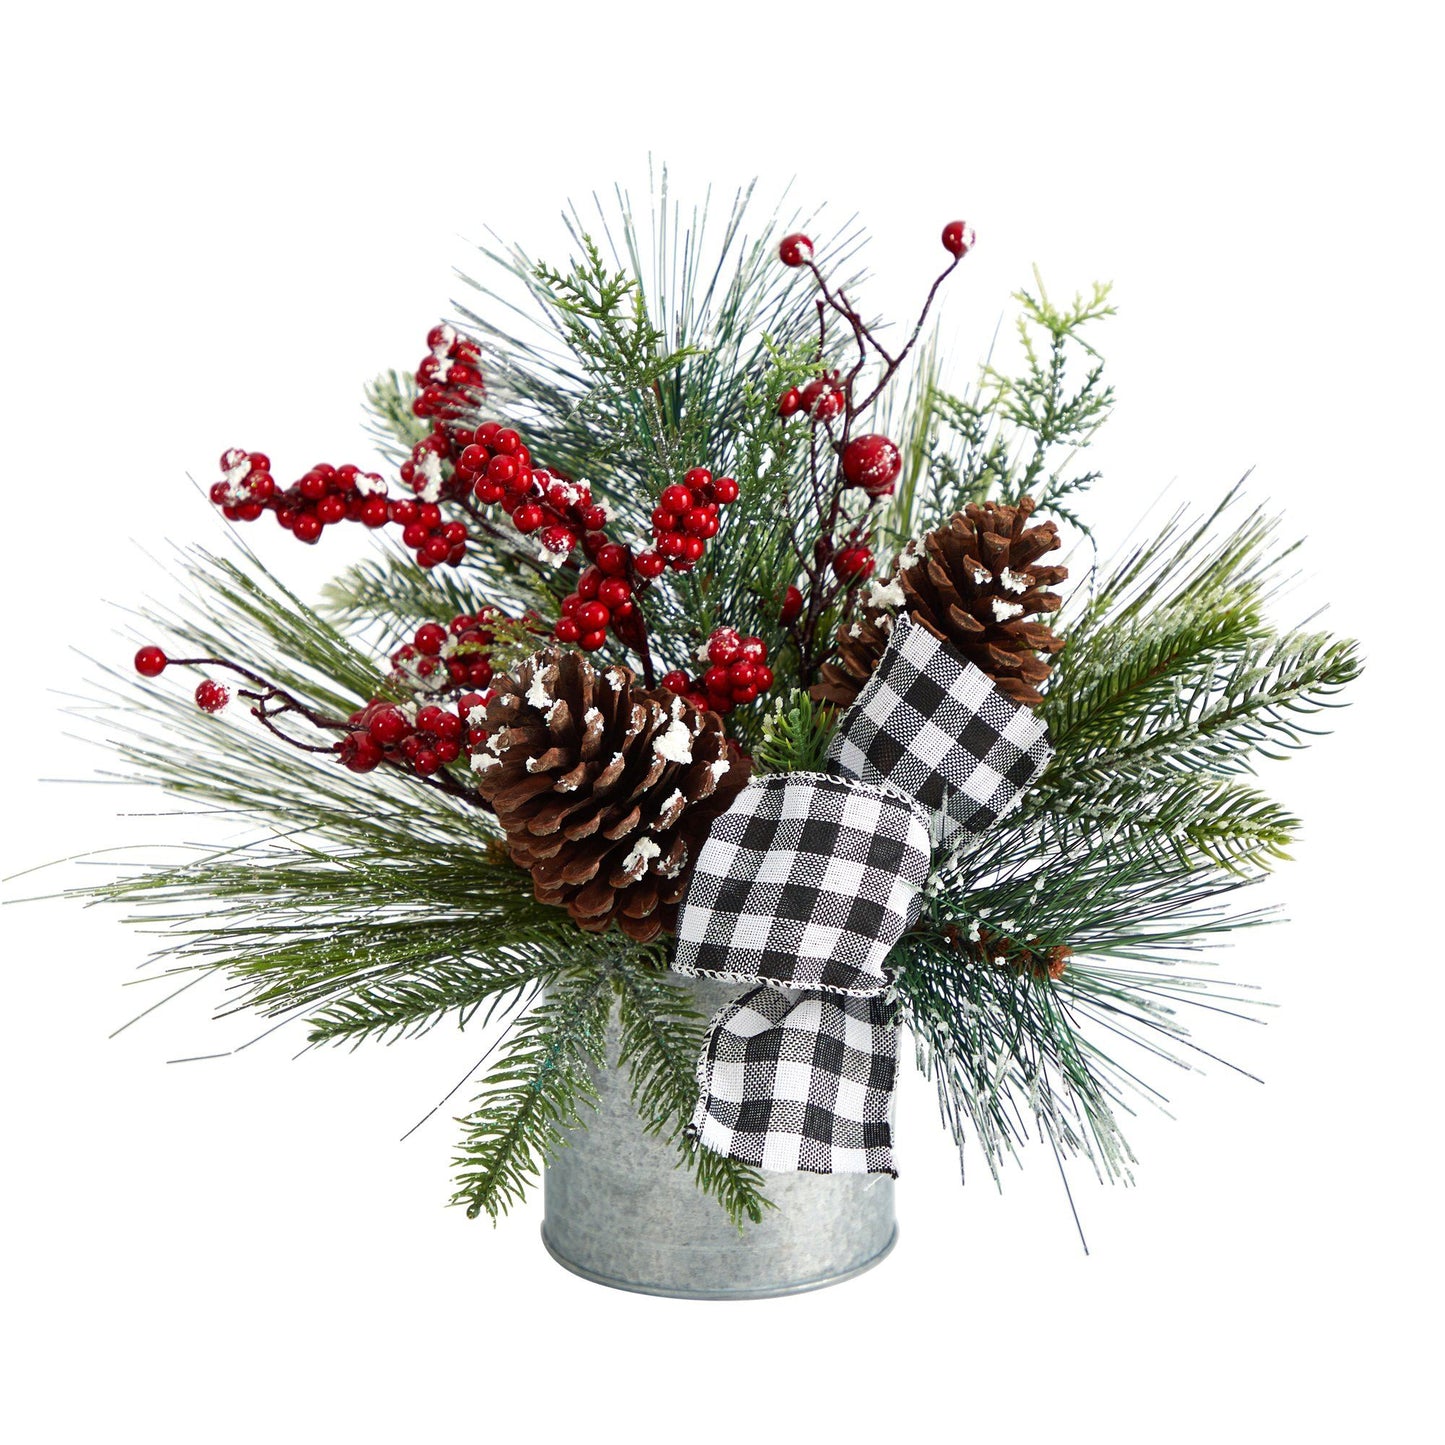 12” Frosted Pinecones and Berries Artificial Arrangement in Vase with Decorative Plaid Bow by Nearly Natural